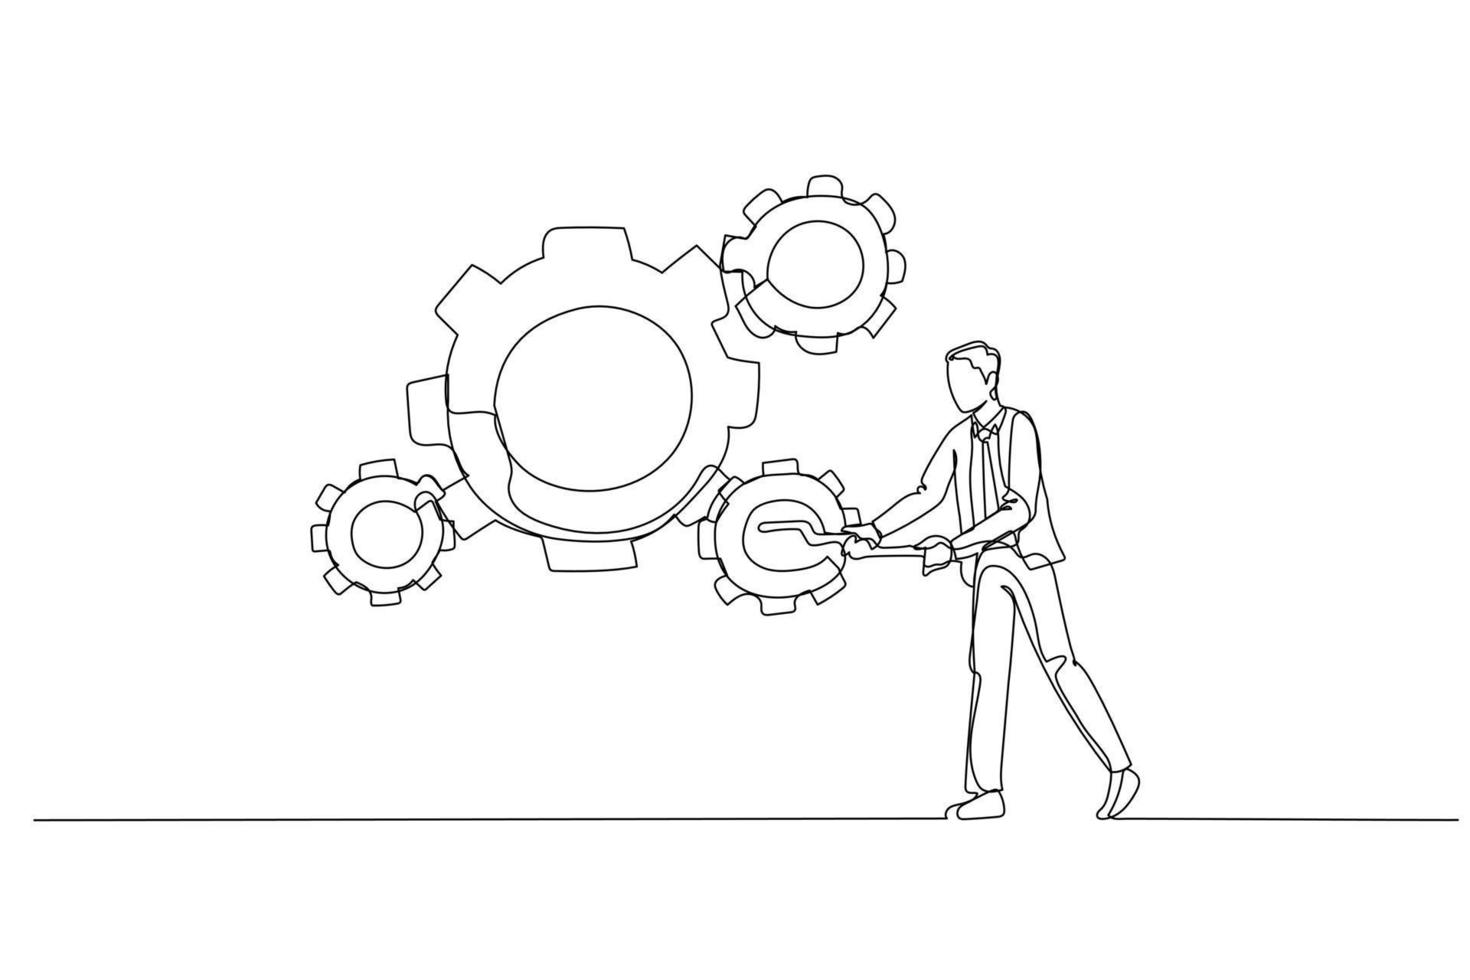 Cartoon of businessman manager use managerial skill to rotate group of business cogwheels. One line style art vector